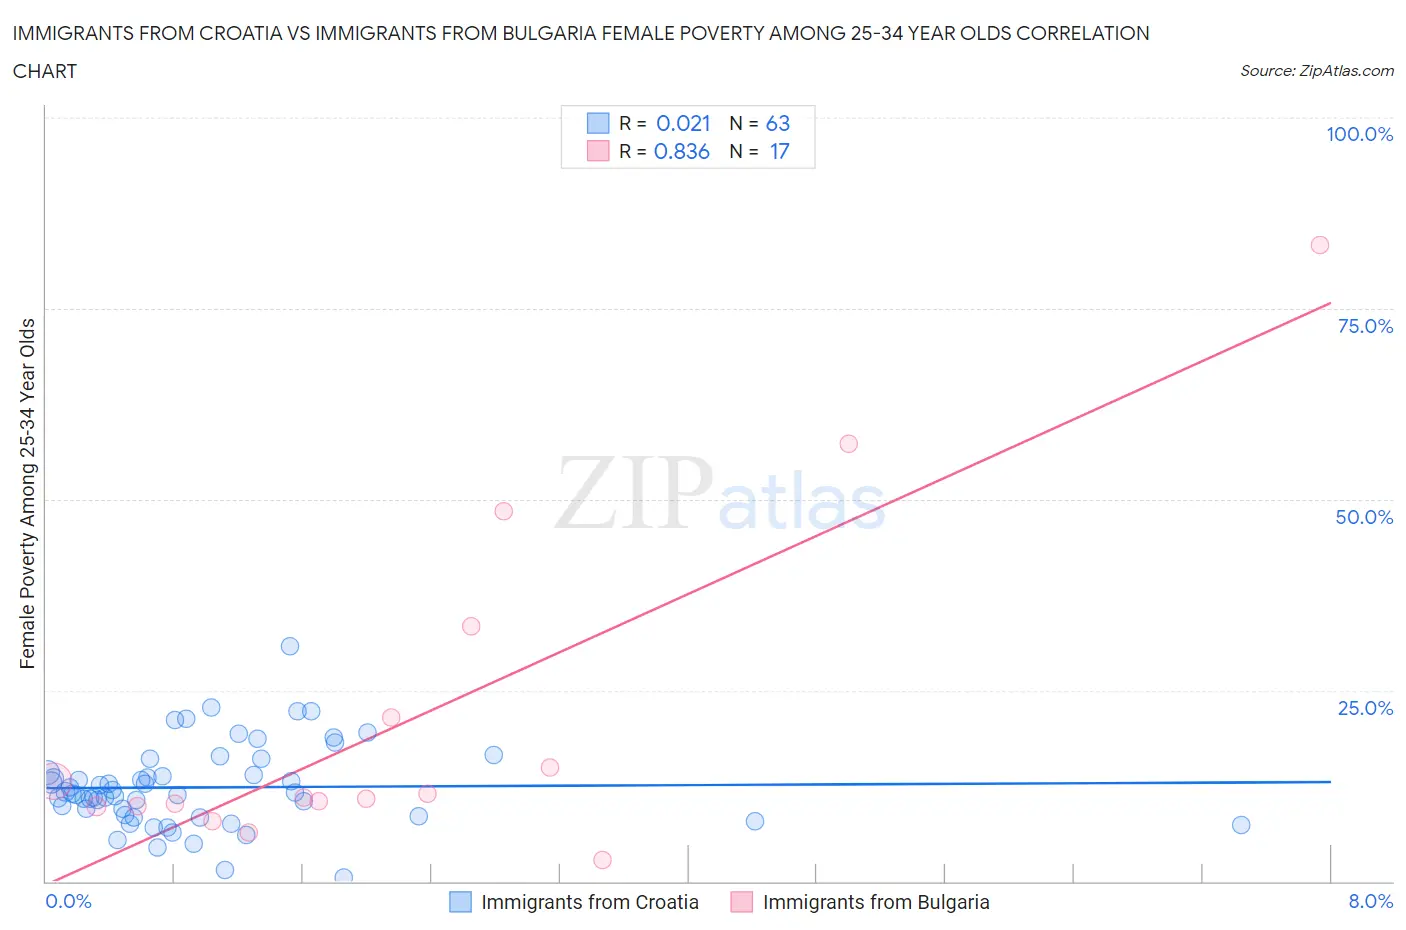 Immigrants from Croatia vs Immigrants from Bulgaria Female Poverty Among 25-34 Year Olds